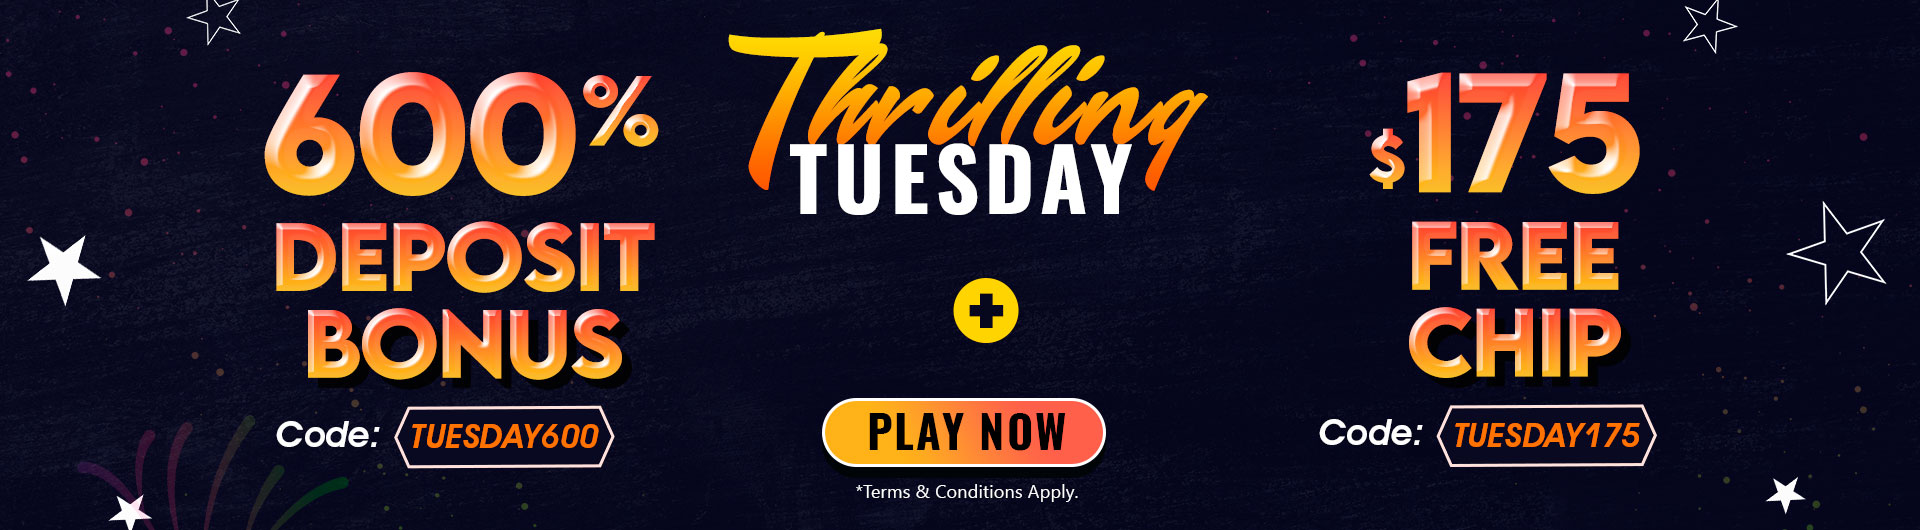 S7_thrilling_tuesday